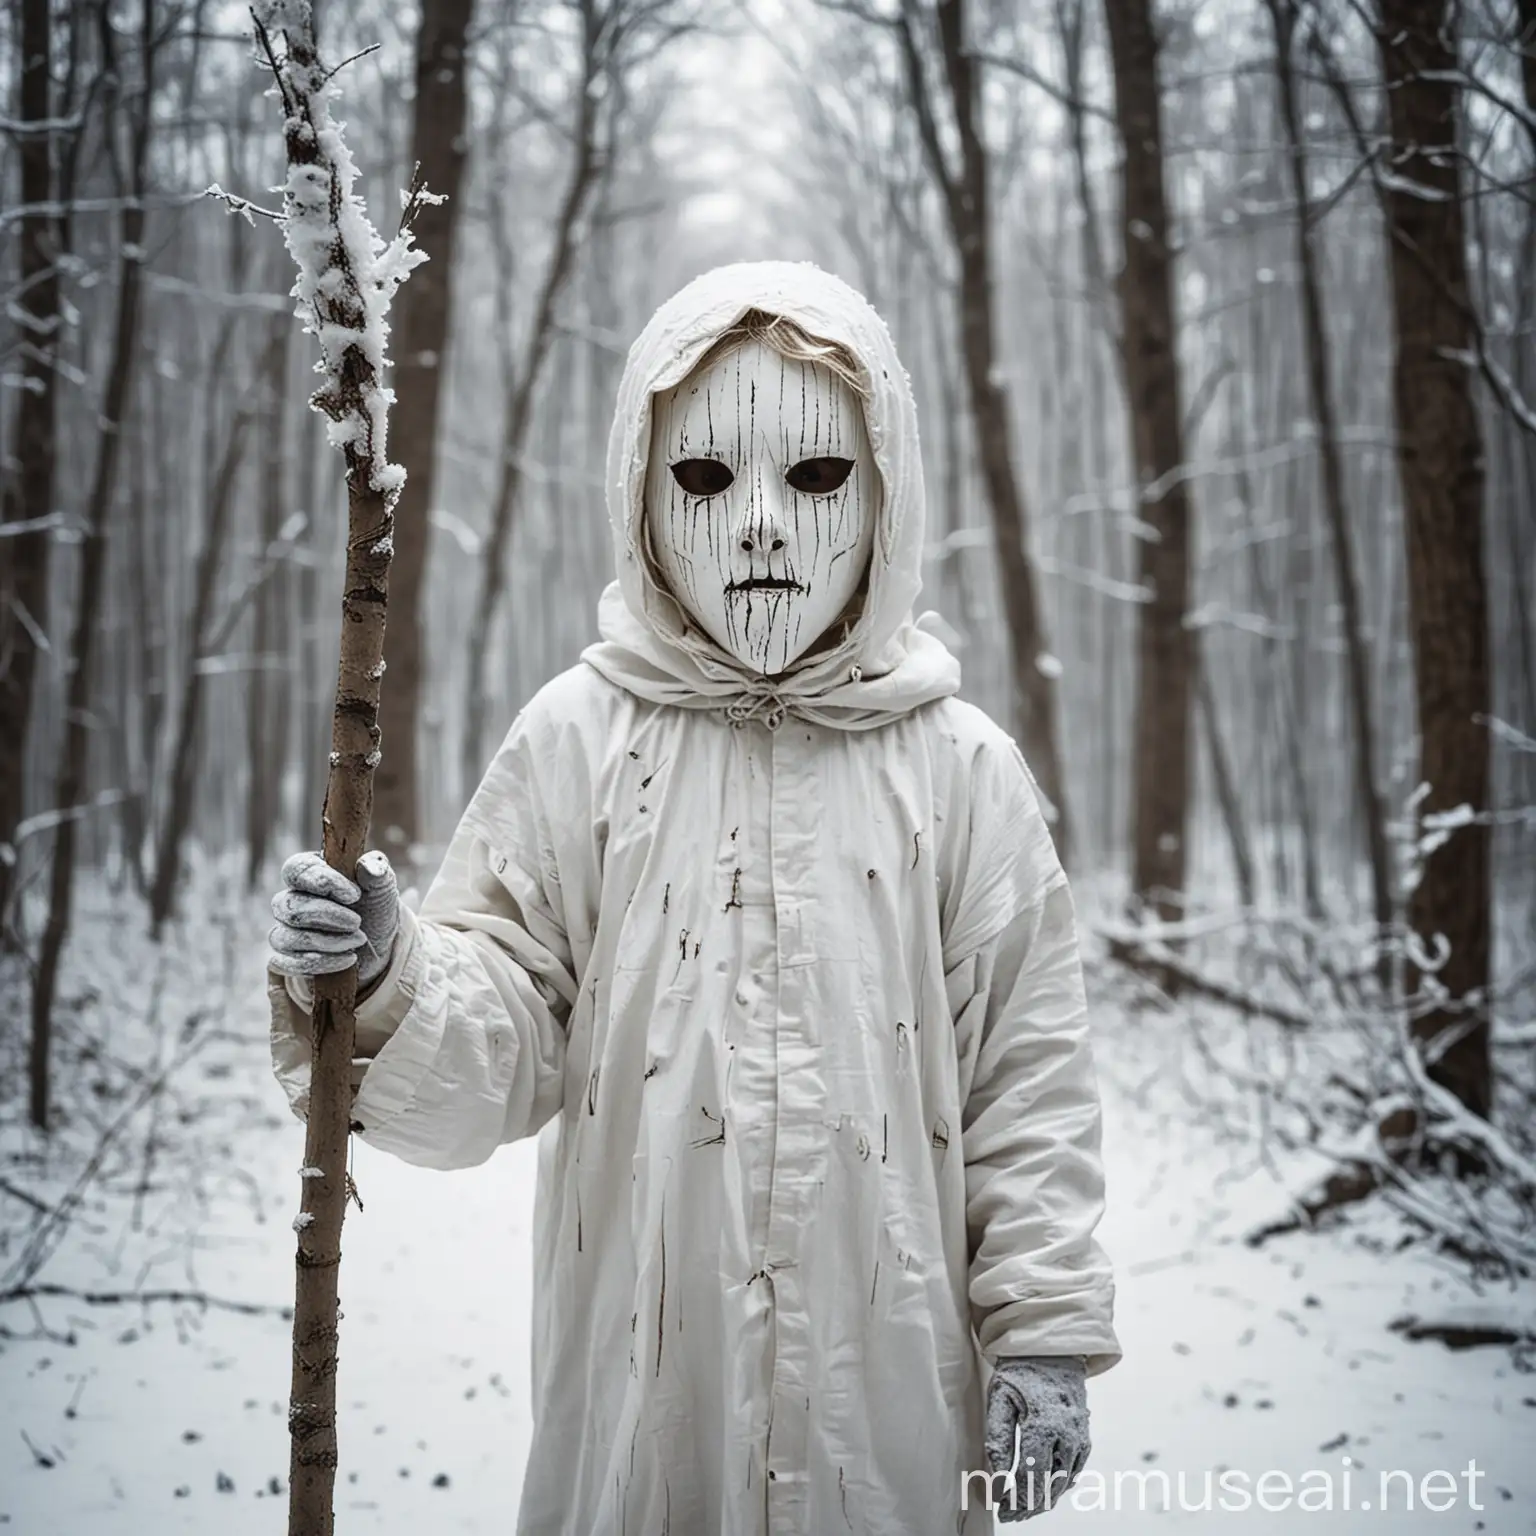 create an image inspired by a incenrraat child in wintery forrest, the child is wearing a white creepy mask and is holding a stick
